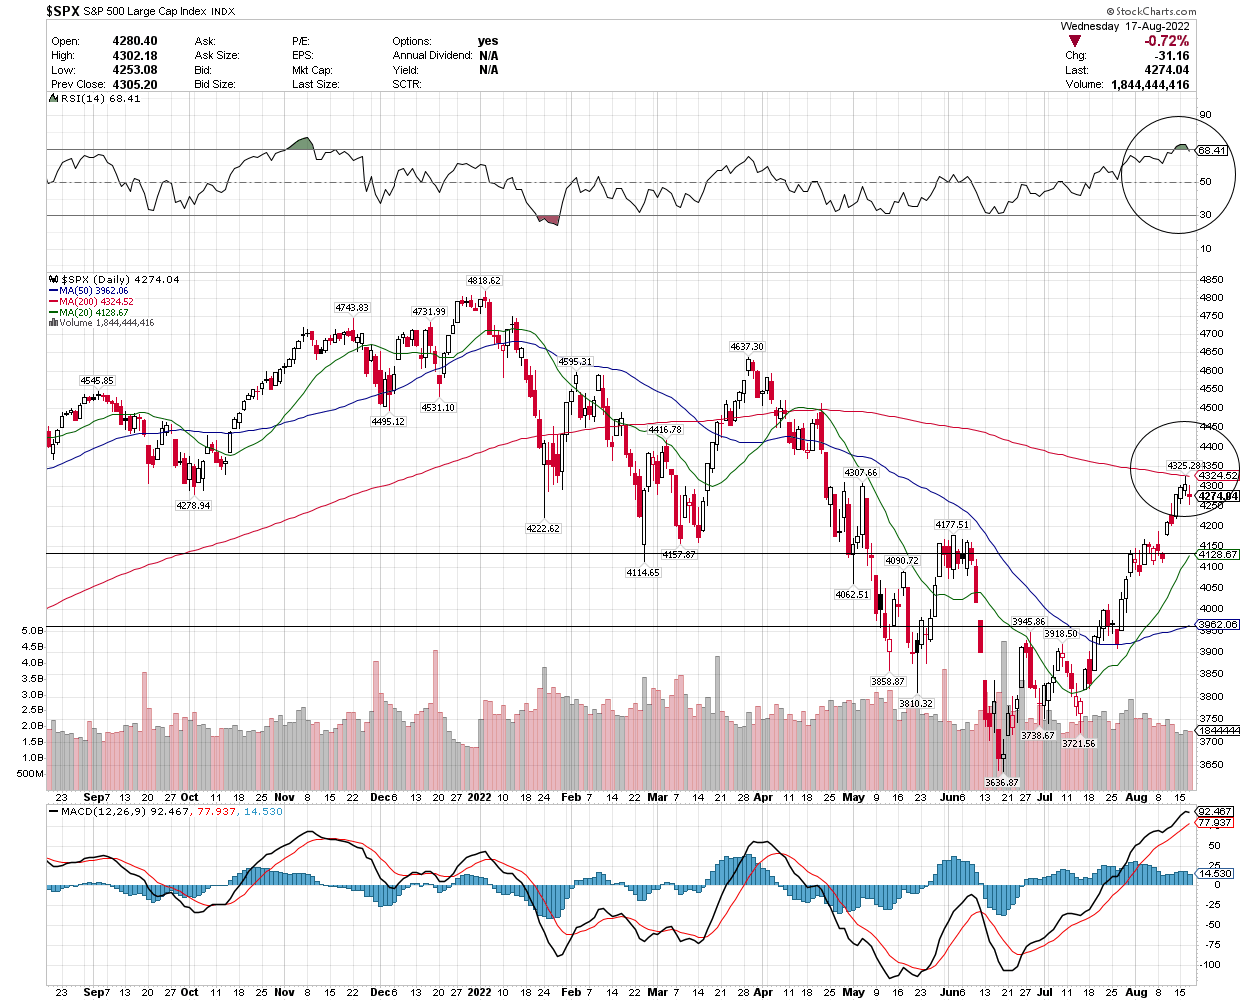 S&P 500 moving averages chart